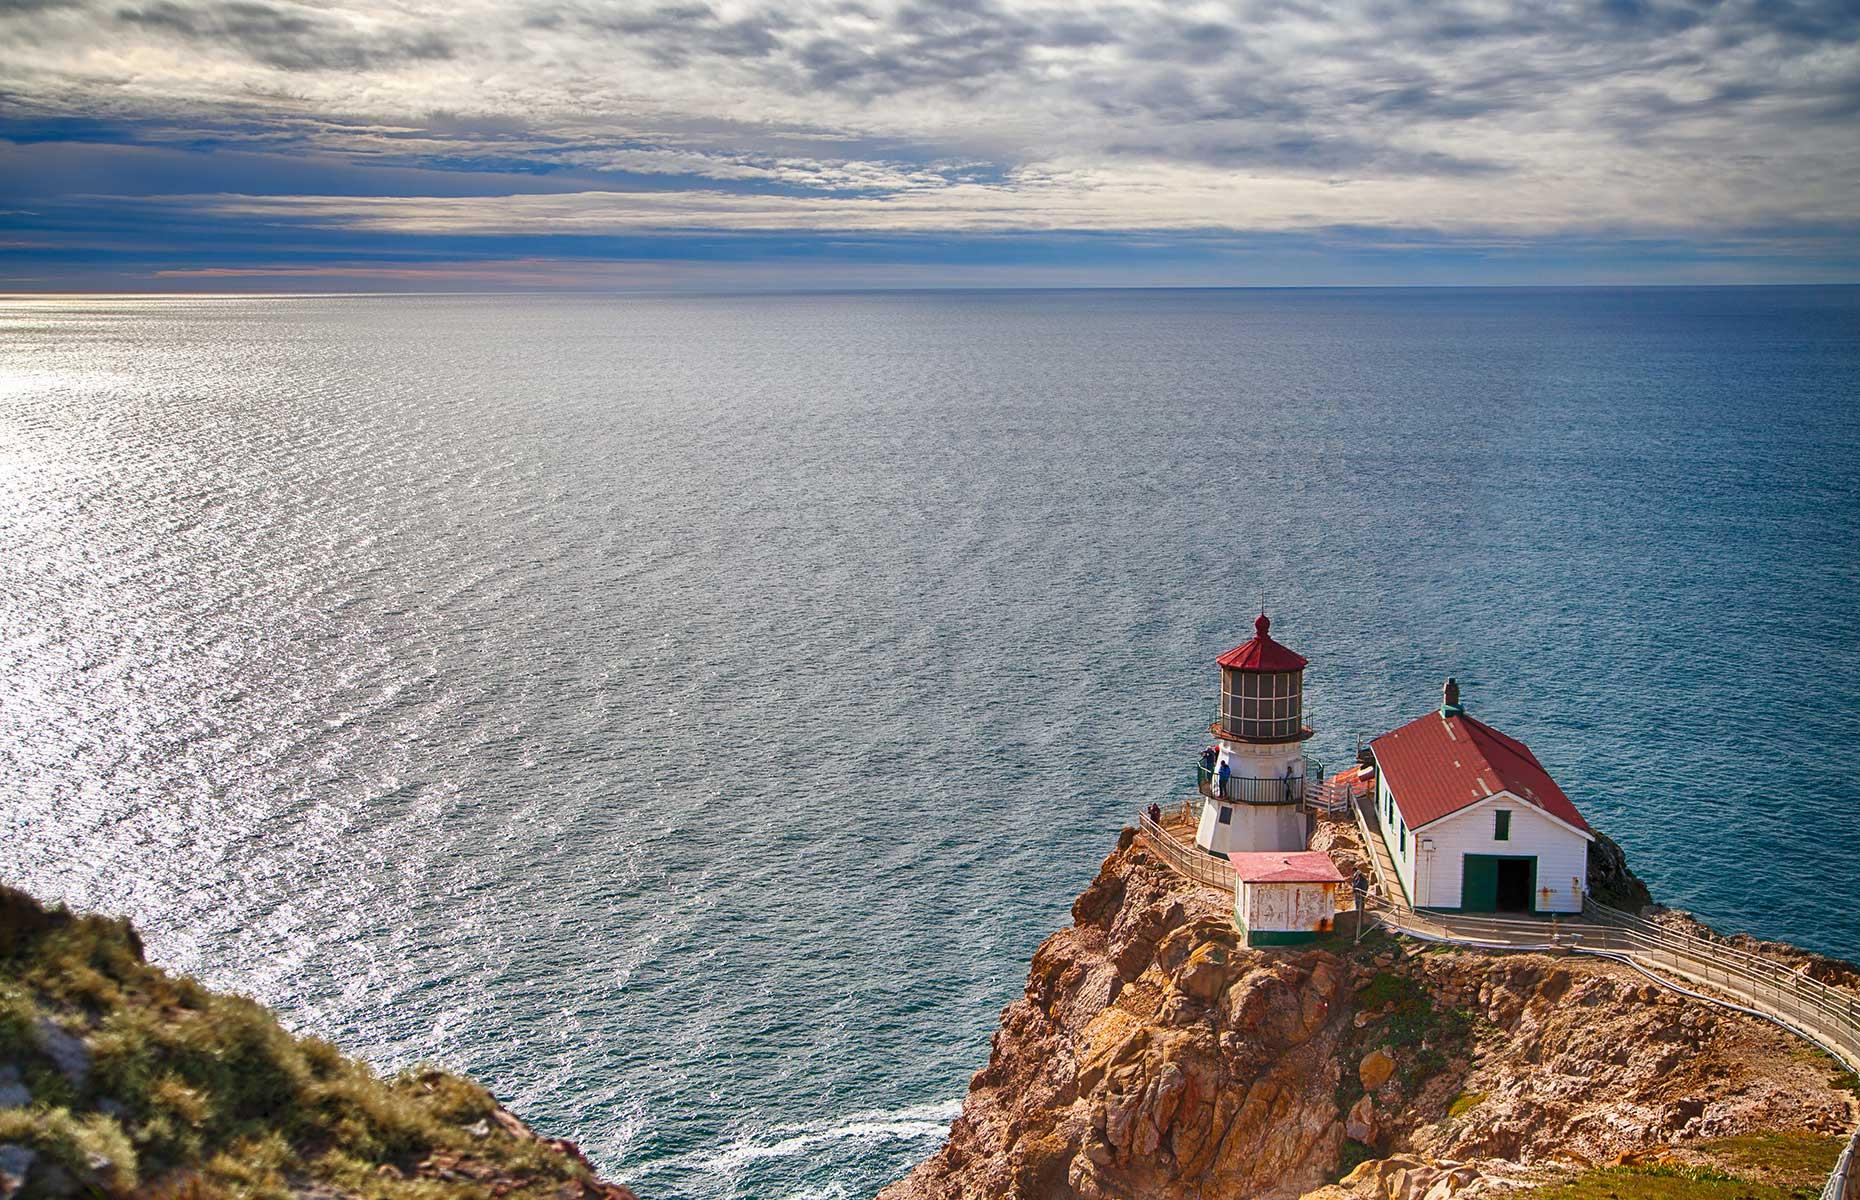 The super-cute Point Reyes Lighthouse feels very Californian. Located on the weather-worn headlands of Point Reyes in Marin County, the 16-sided lantern and 375-foot (114m) tower can only be accessed by climbing down the 313 stairs along the cliff. First lit in 1870, its parts were built in France and South America before being constructed on this spot, which had to be blown up with dynamite to level the surface.